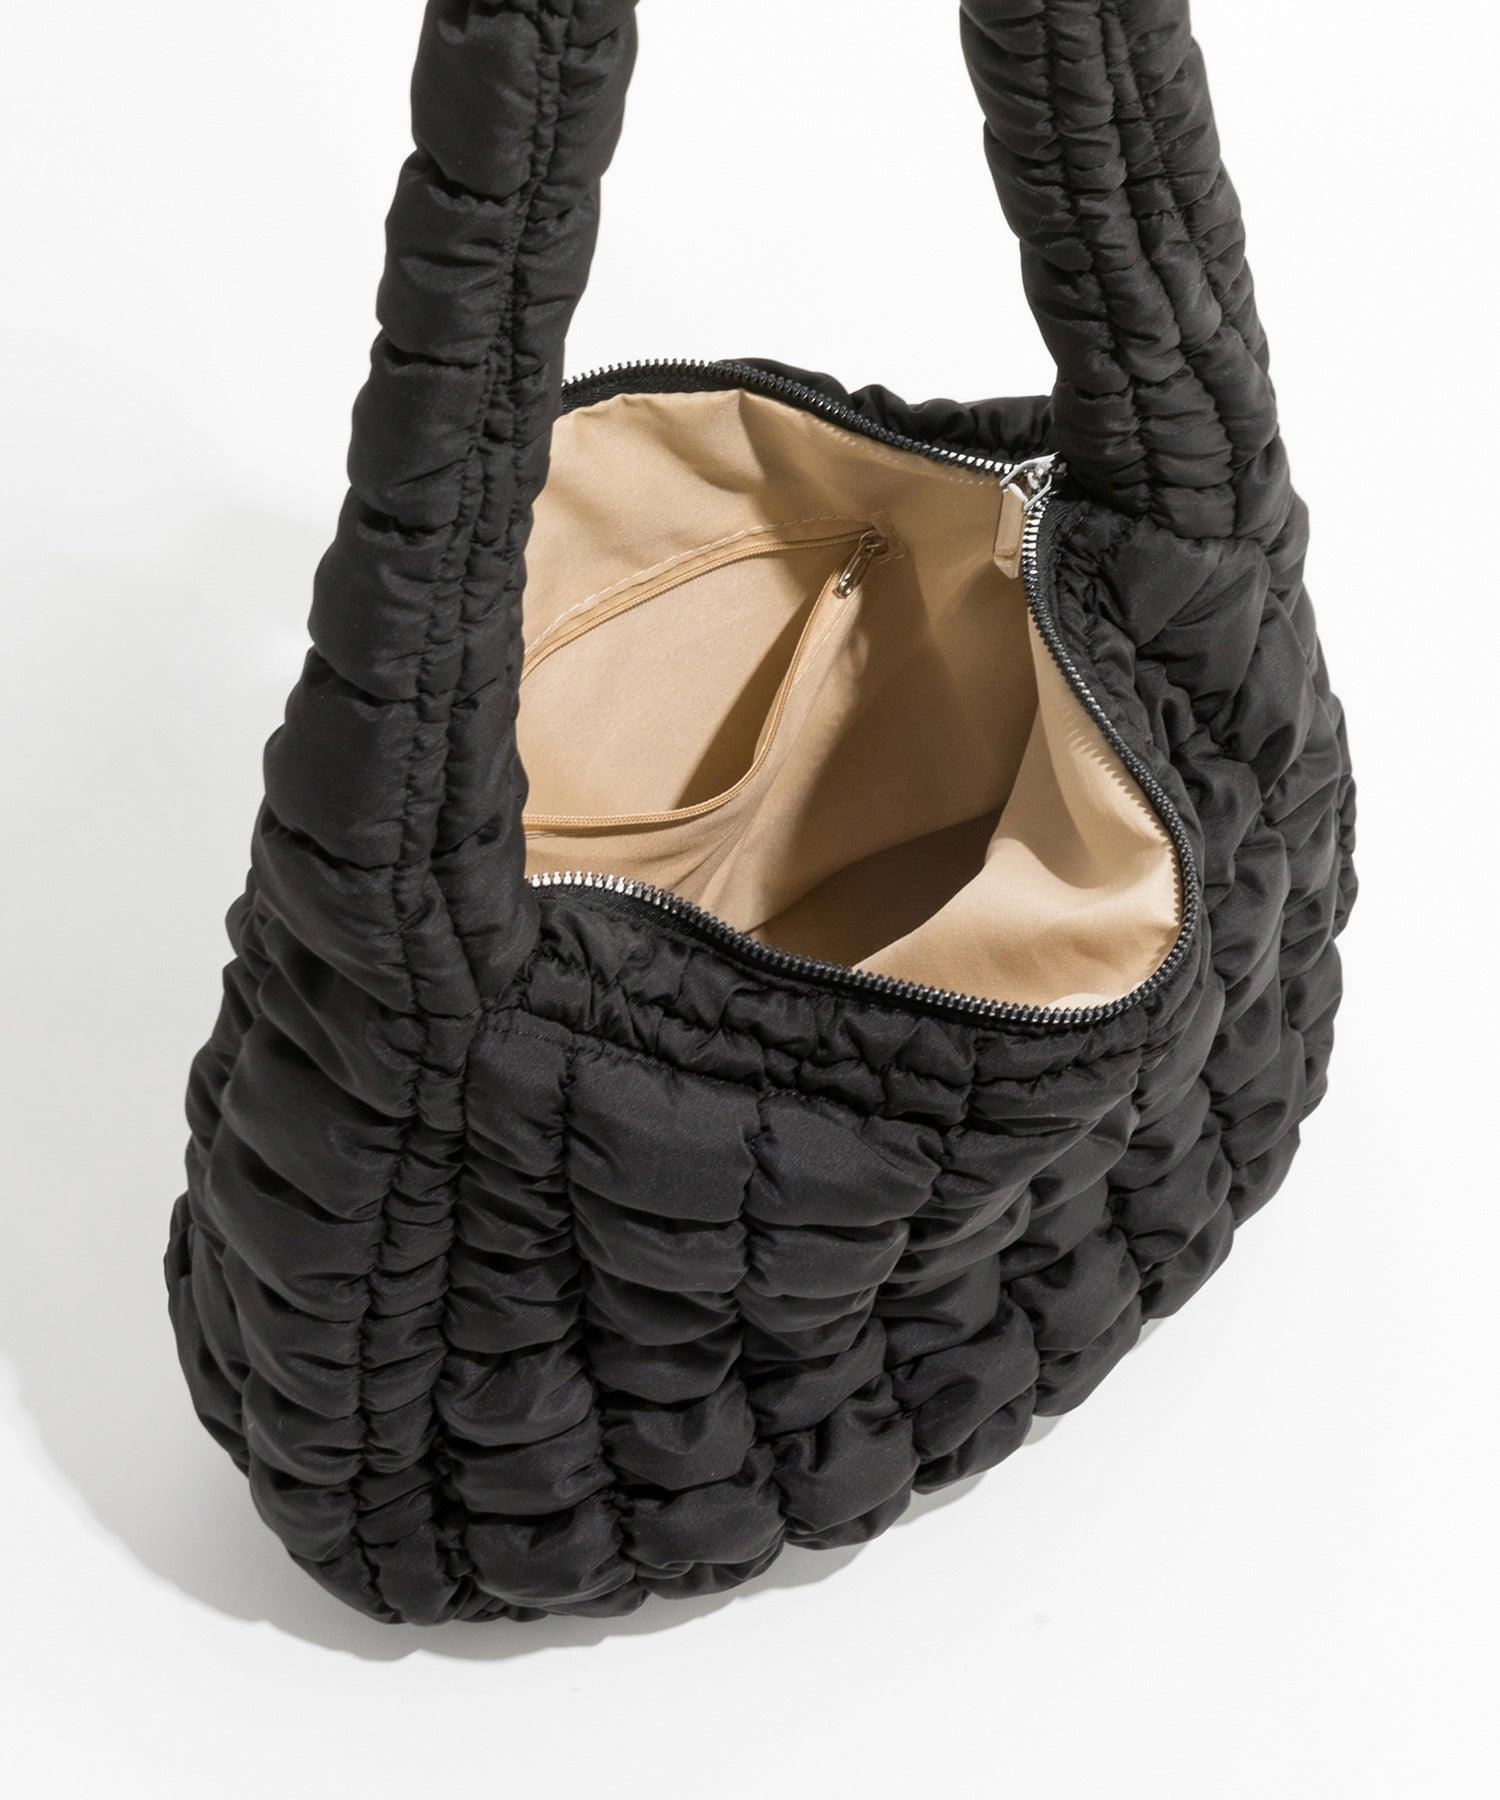 Classic Aria Cloud Hobo Bag - Stepping on Clouds